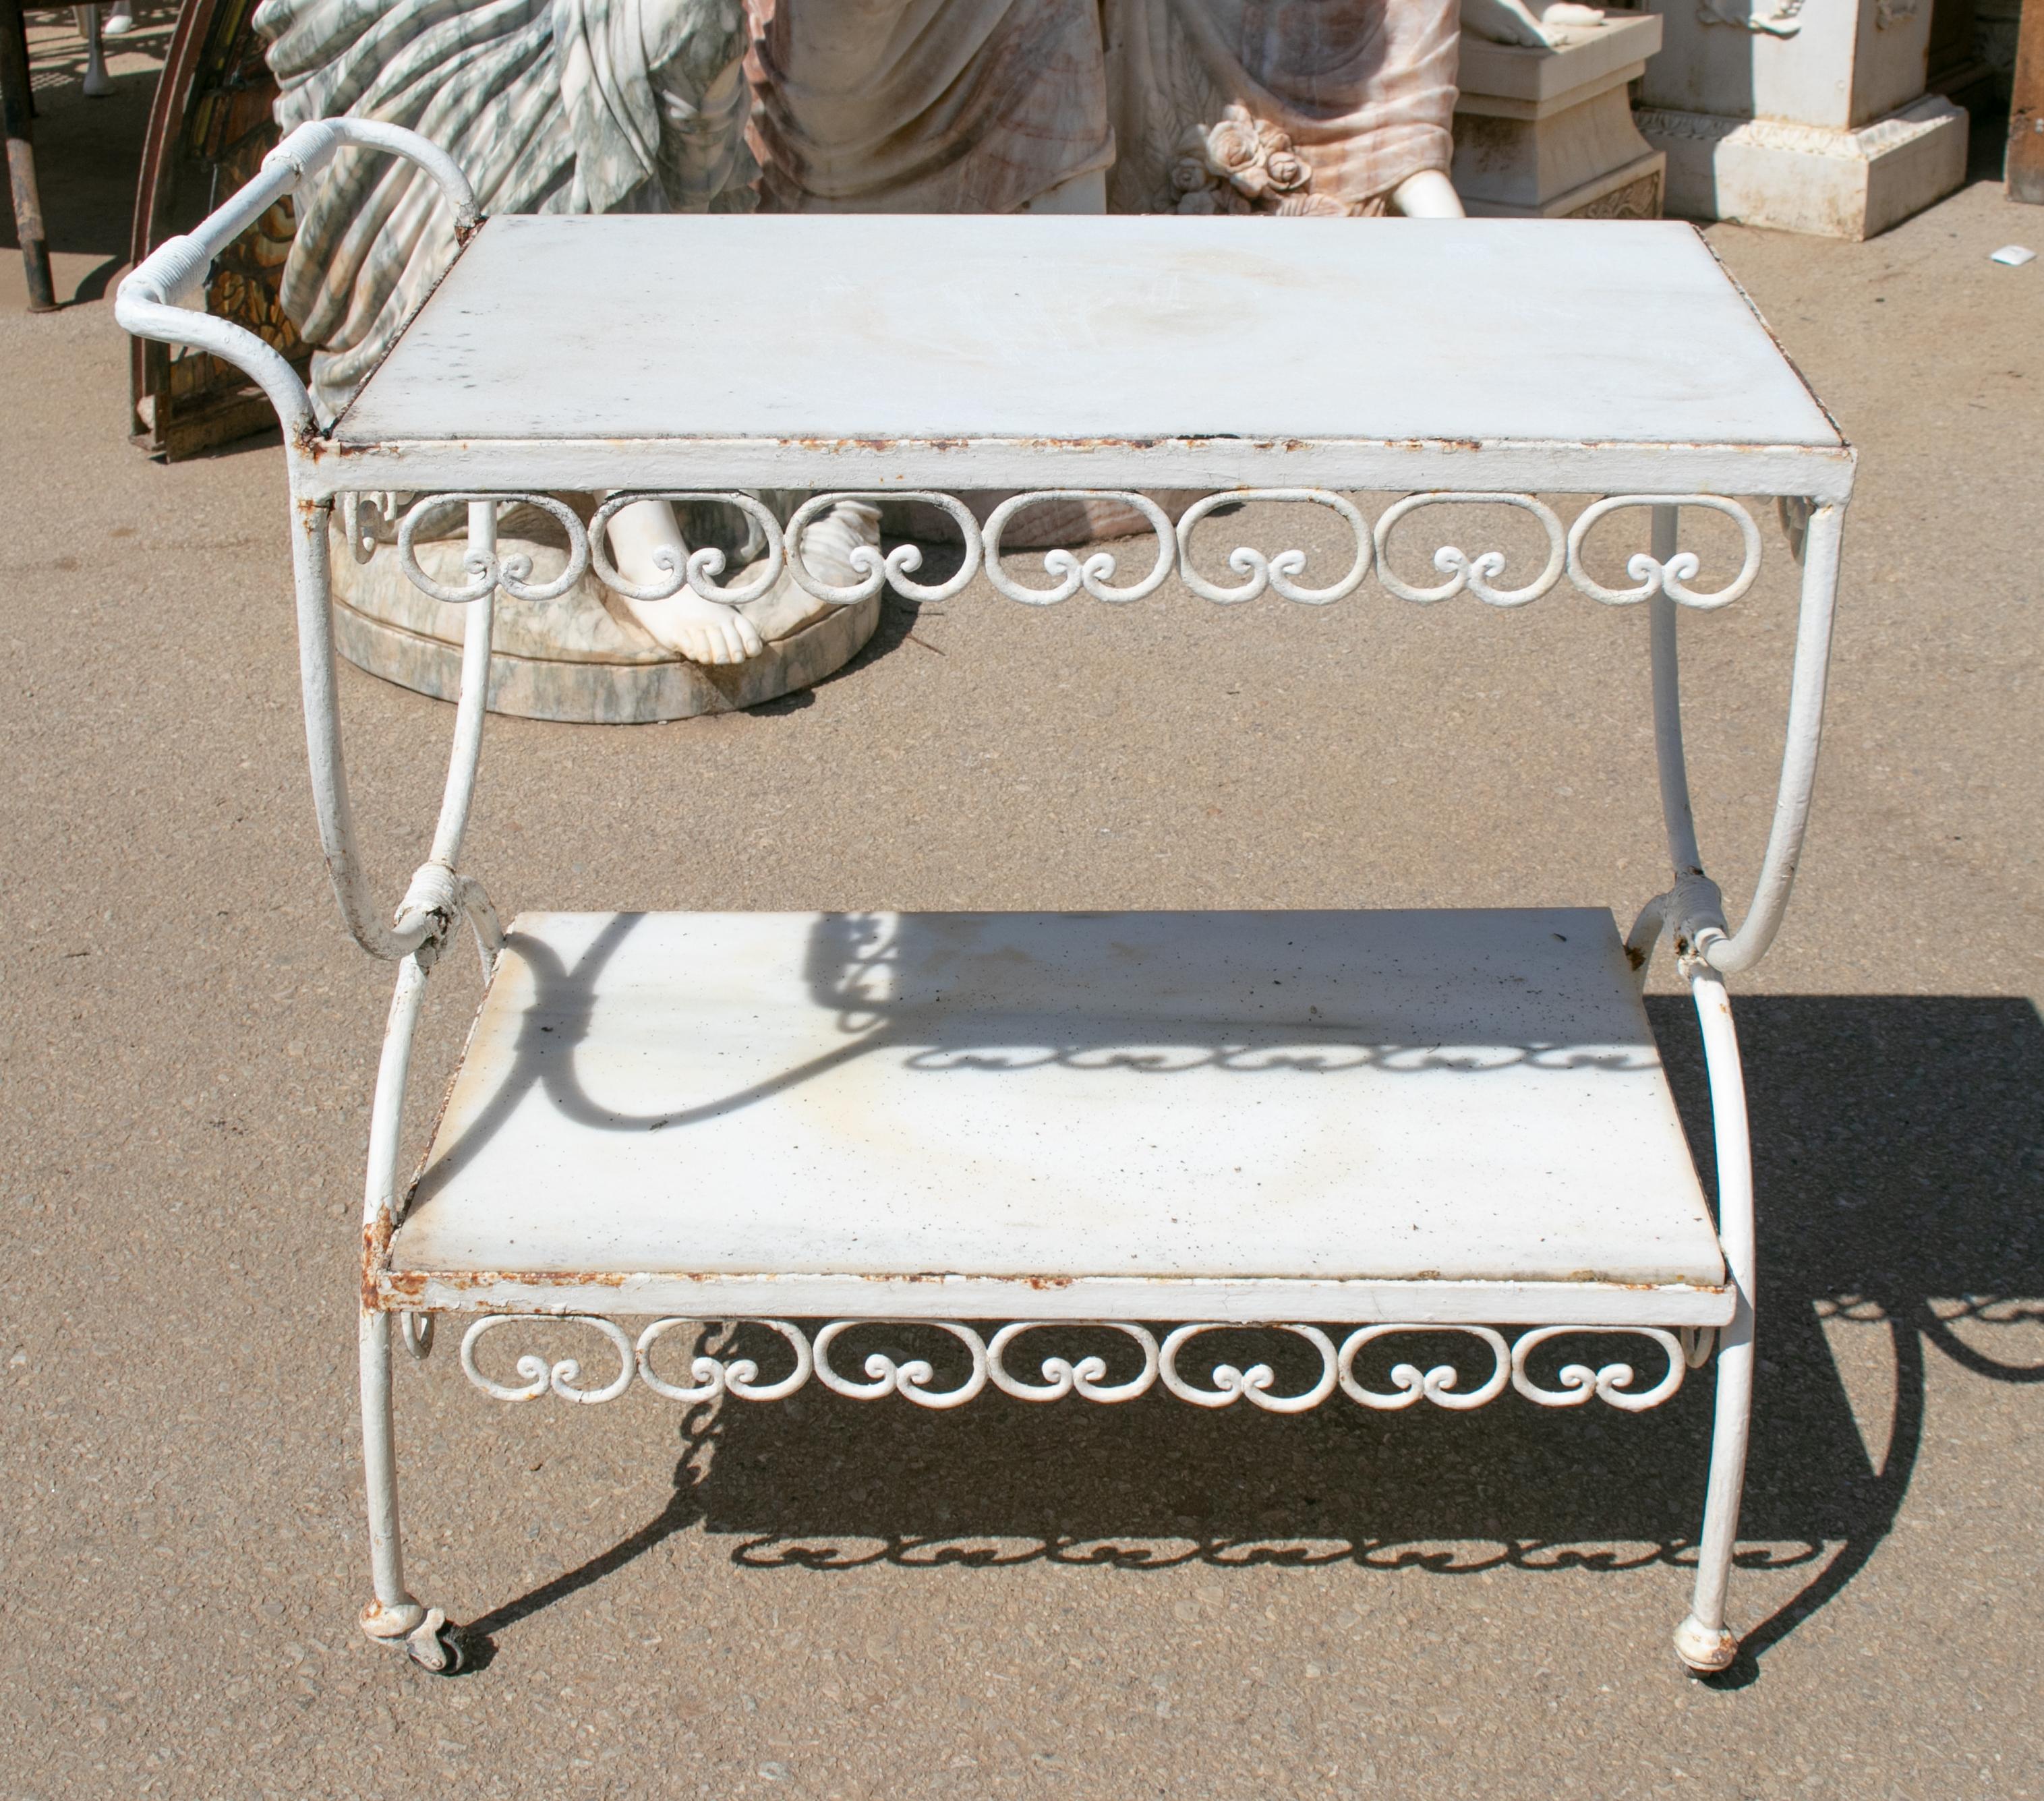 1970s Spanish iron drinks trolley with marble shelves.